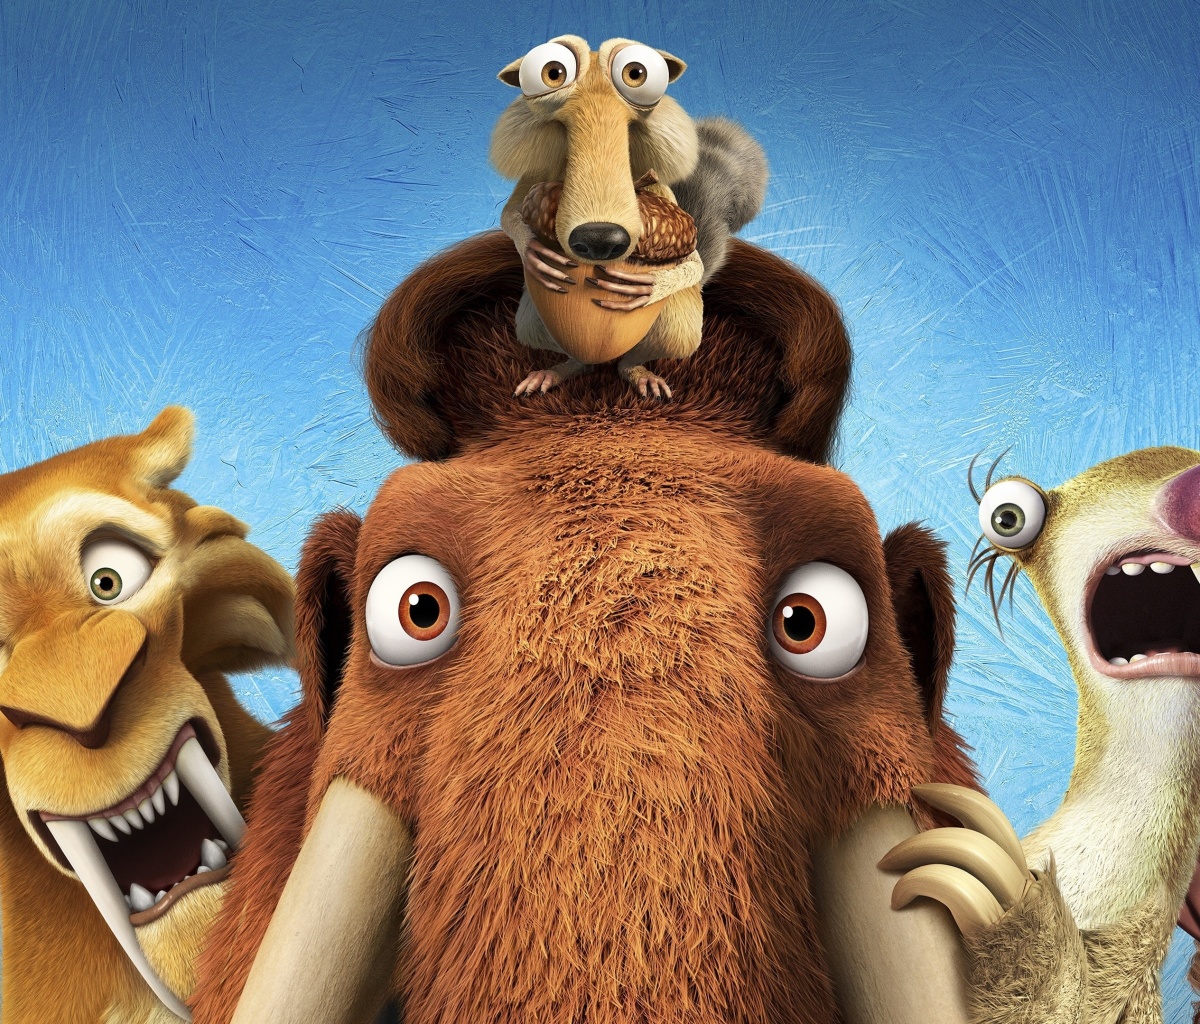 Ice Age 5 Collision Course with Diego, Manny, Scrat, Sid, Mammoths wallpaper 1200x1024